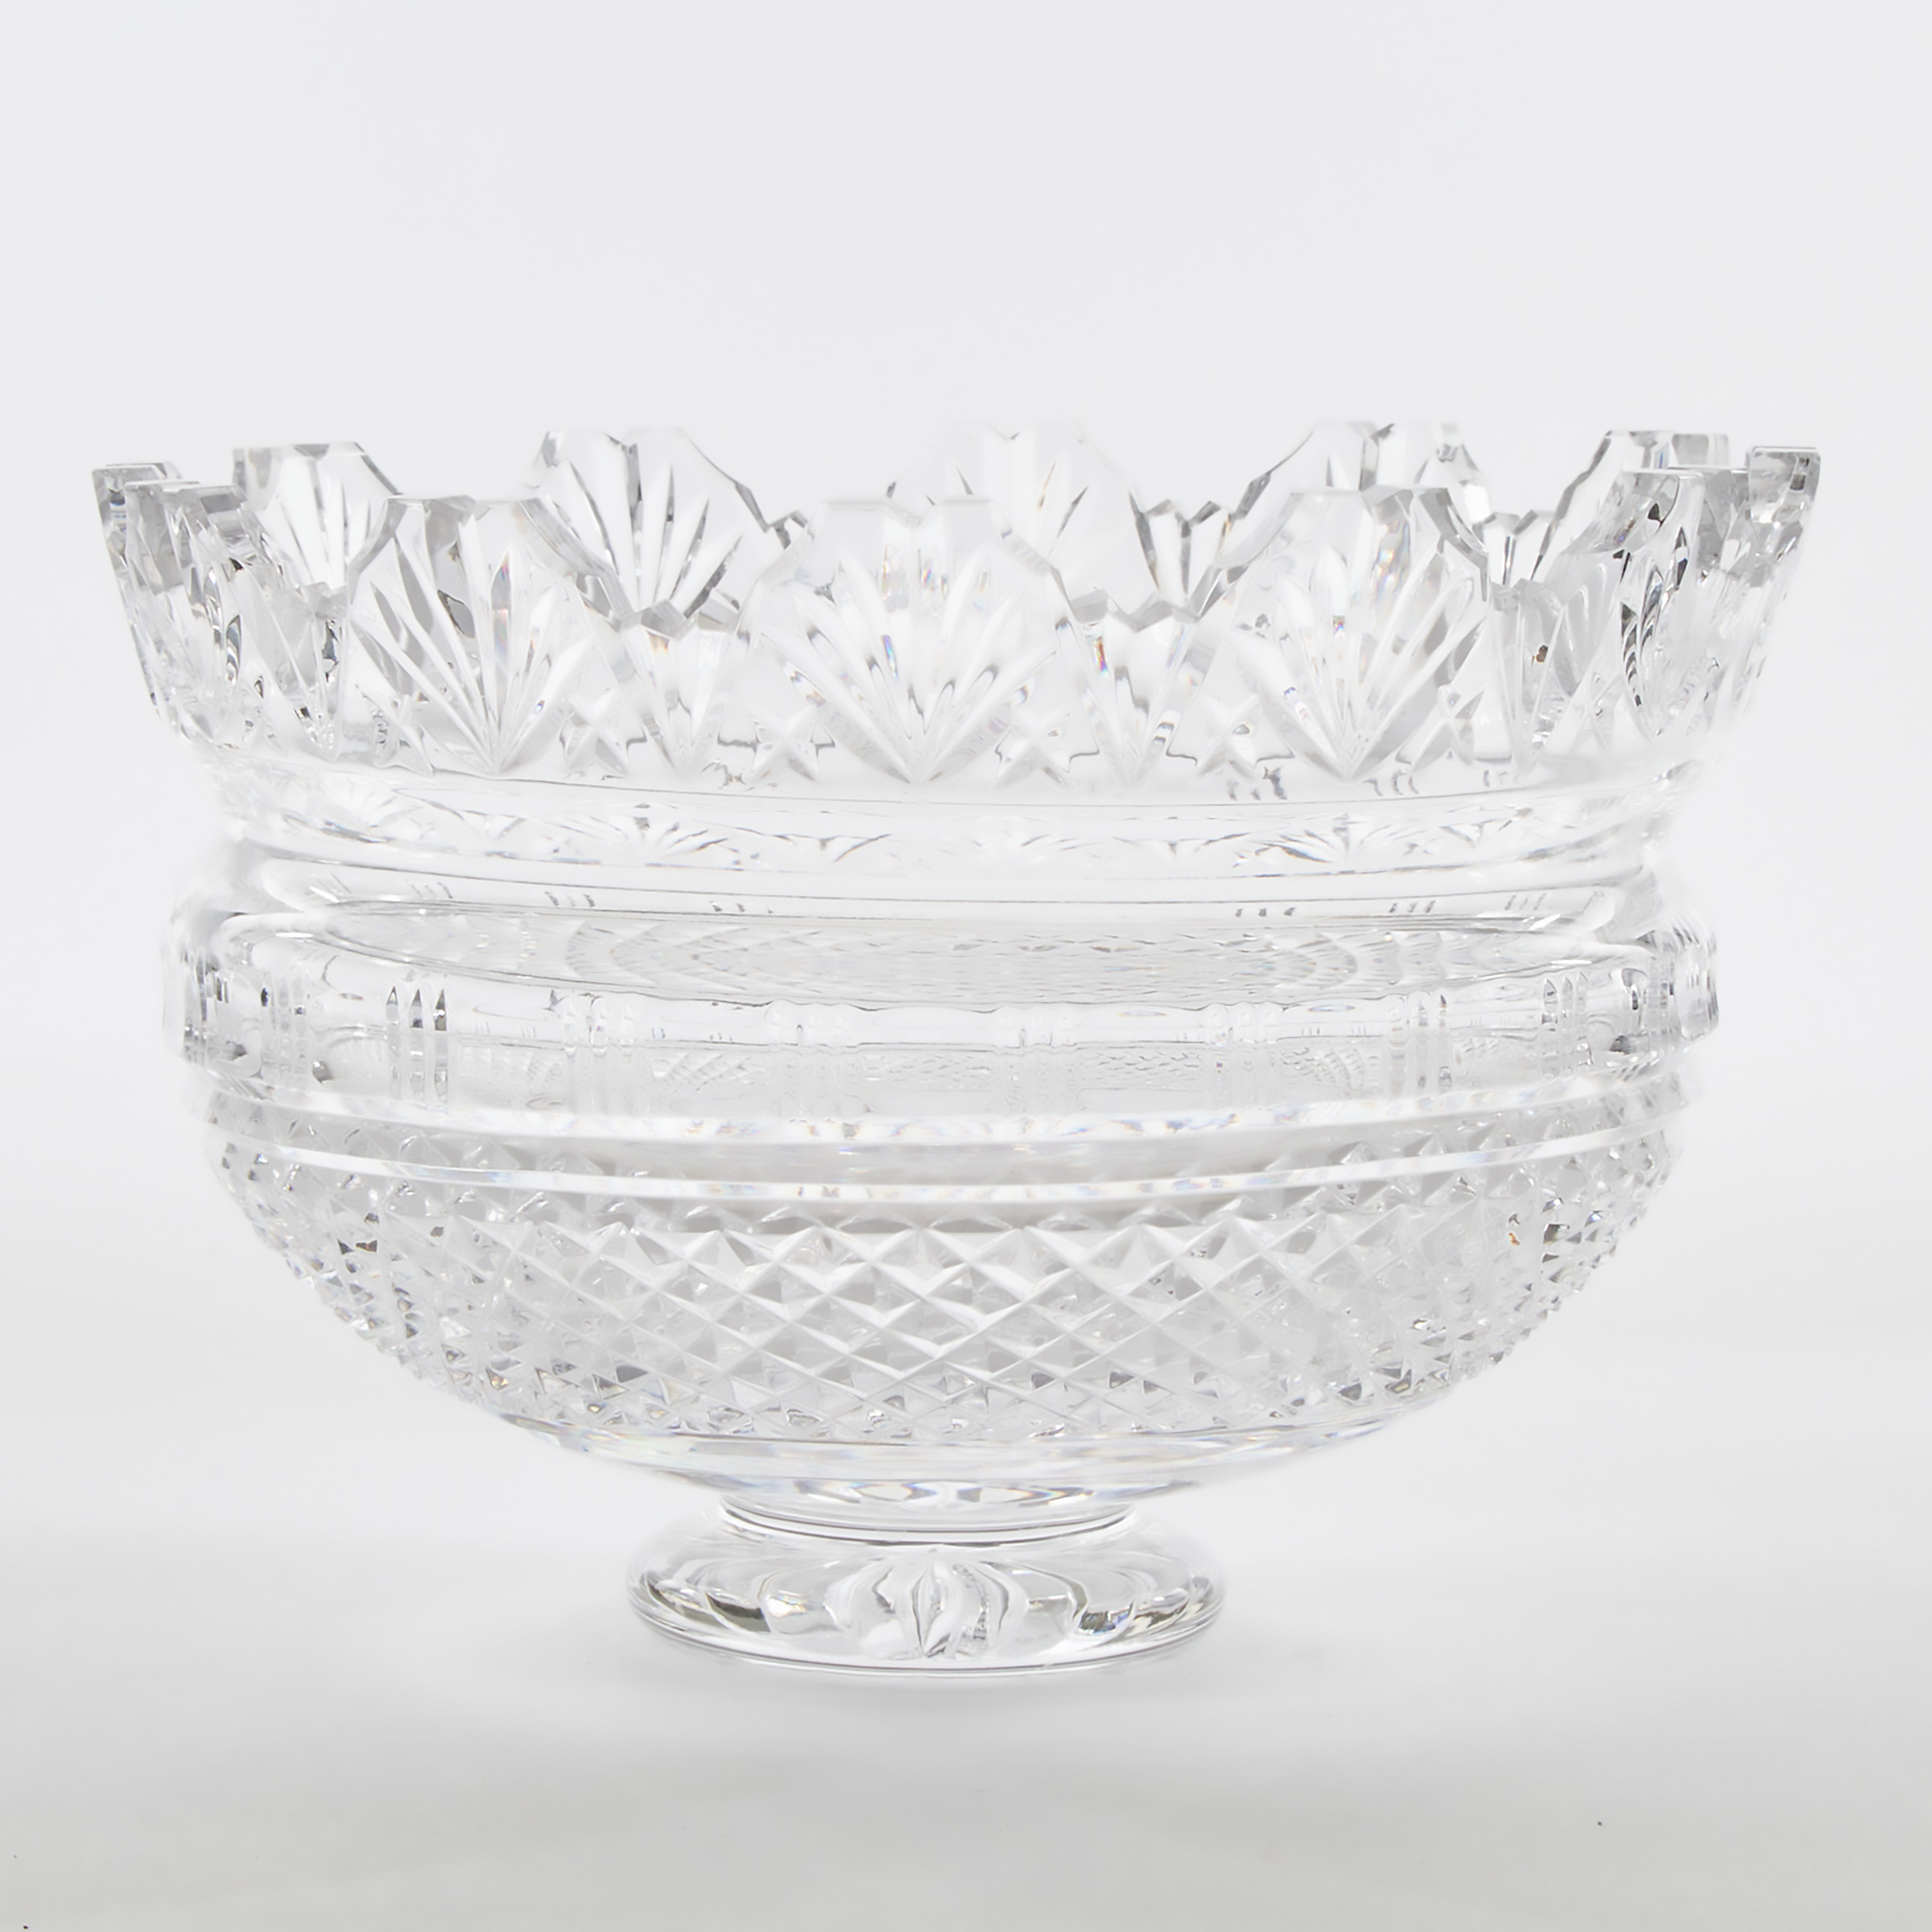 Waterford Cut Glass Centrepiece Bowl, 20th century